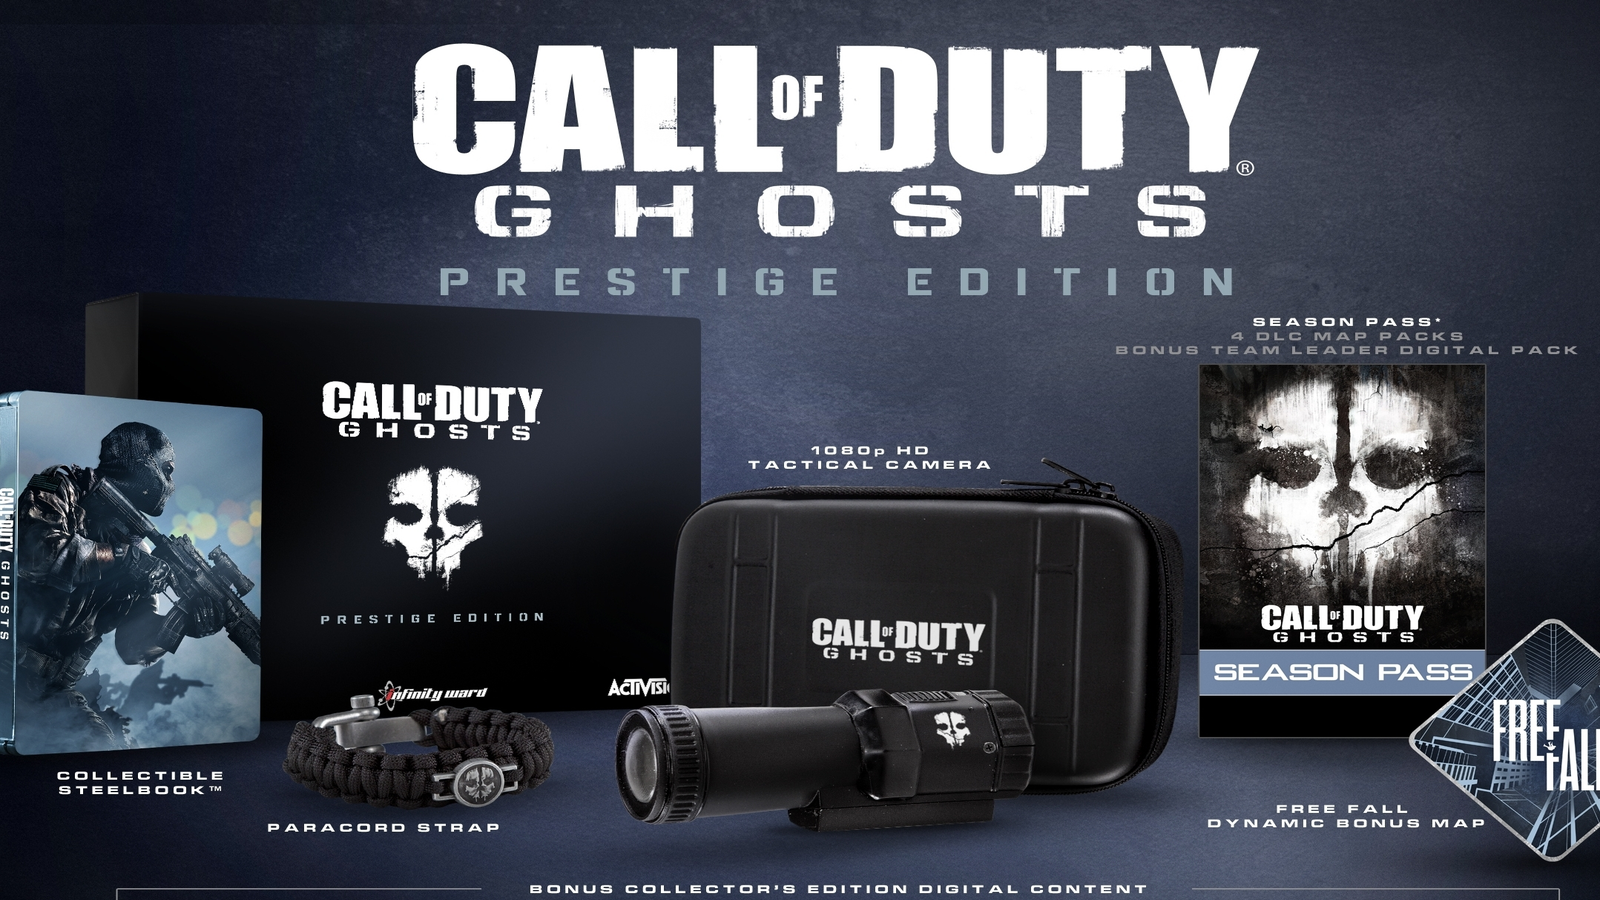 2nd & Charles - Call of Duty Ghosts Prestige Edition on PS4 just came in  the buyback. It comes with a 1080p HD tactical camera, a paracord strap and  the steelbook collectible